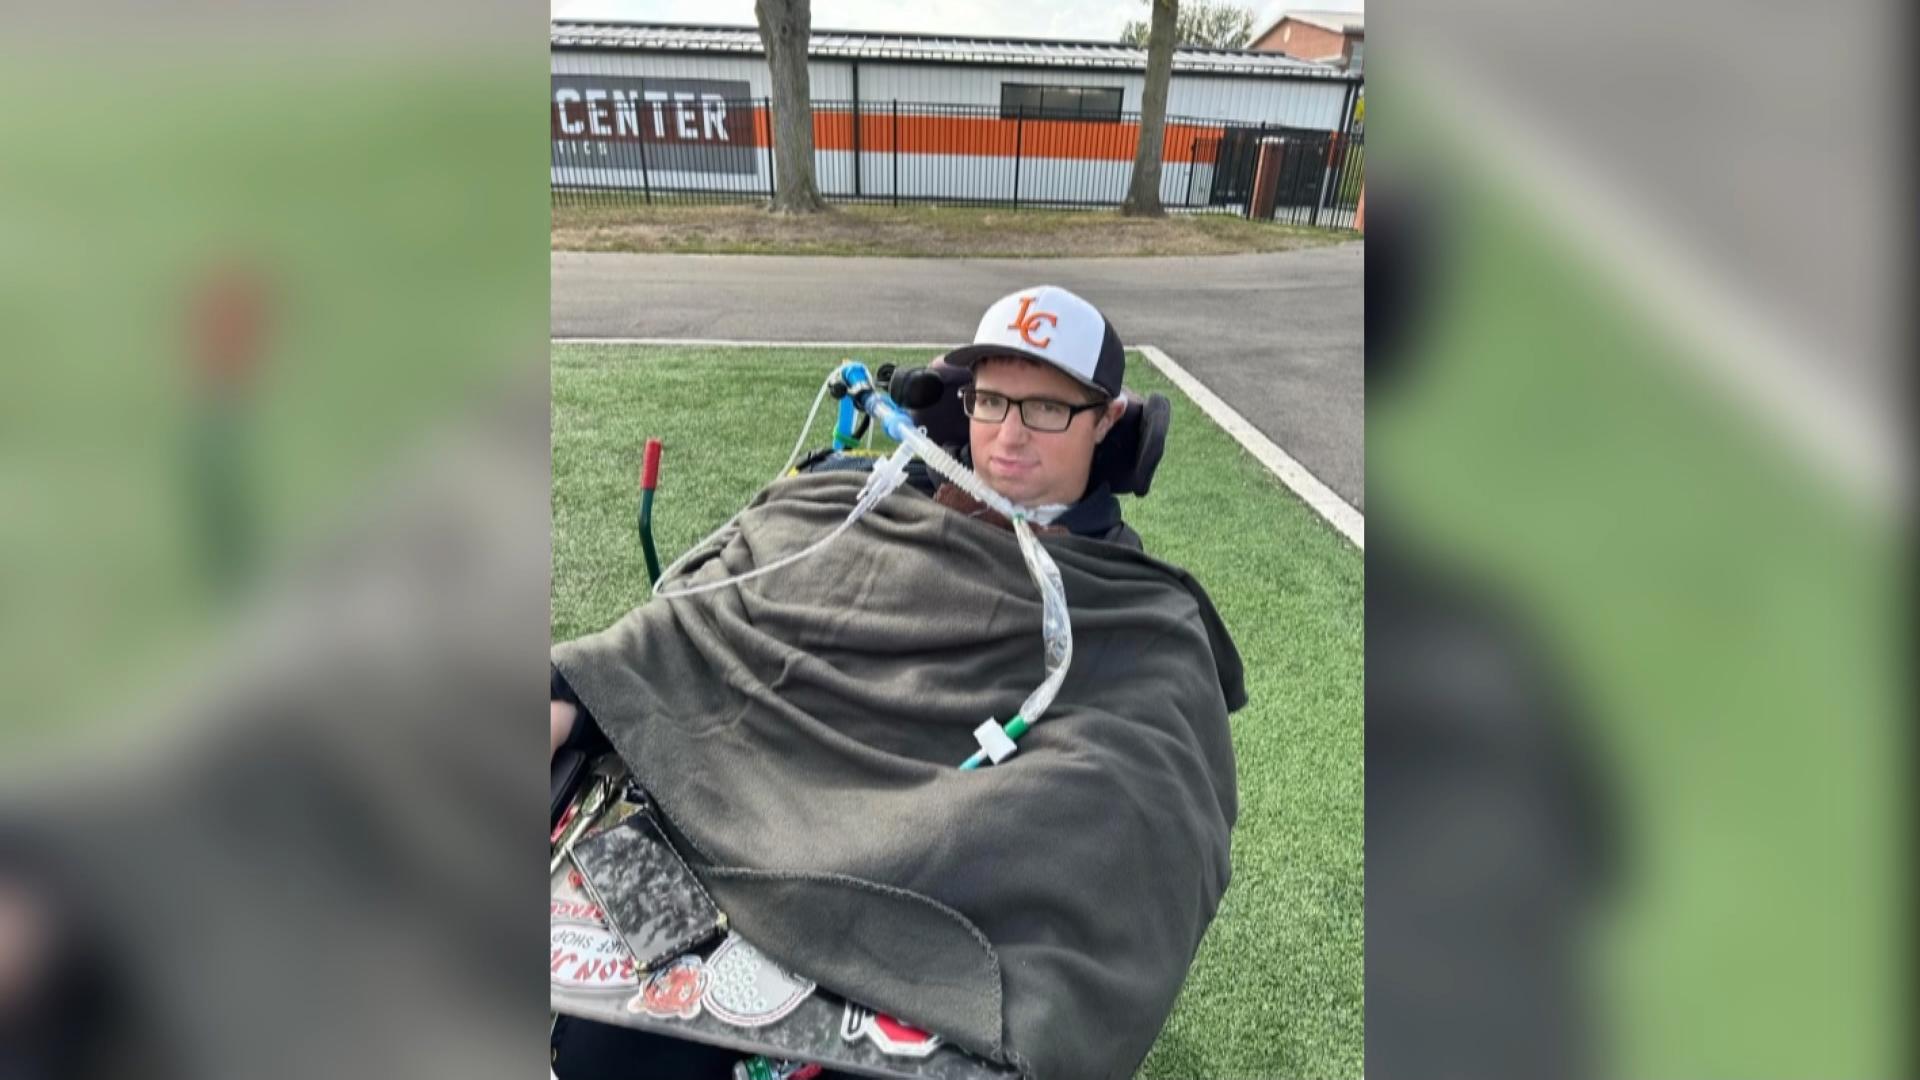 Kent Spiess, a staple of Liberty Center High School football games, died in April at the age of 38 following a long battle with Duchenne muscular dystrophy.